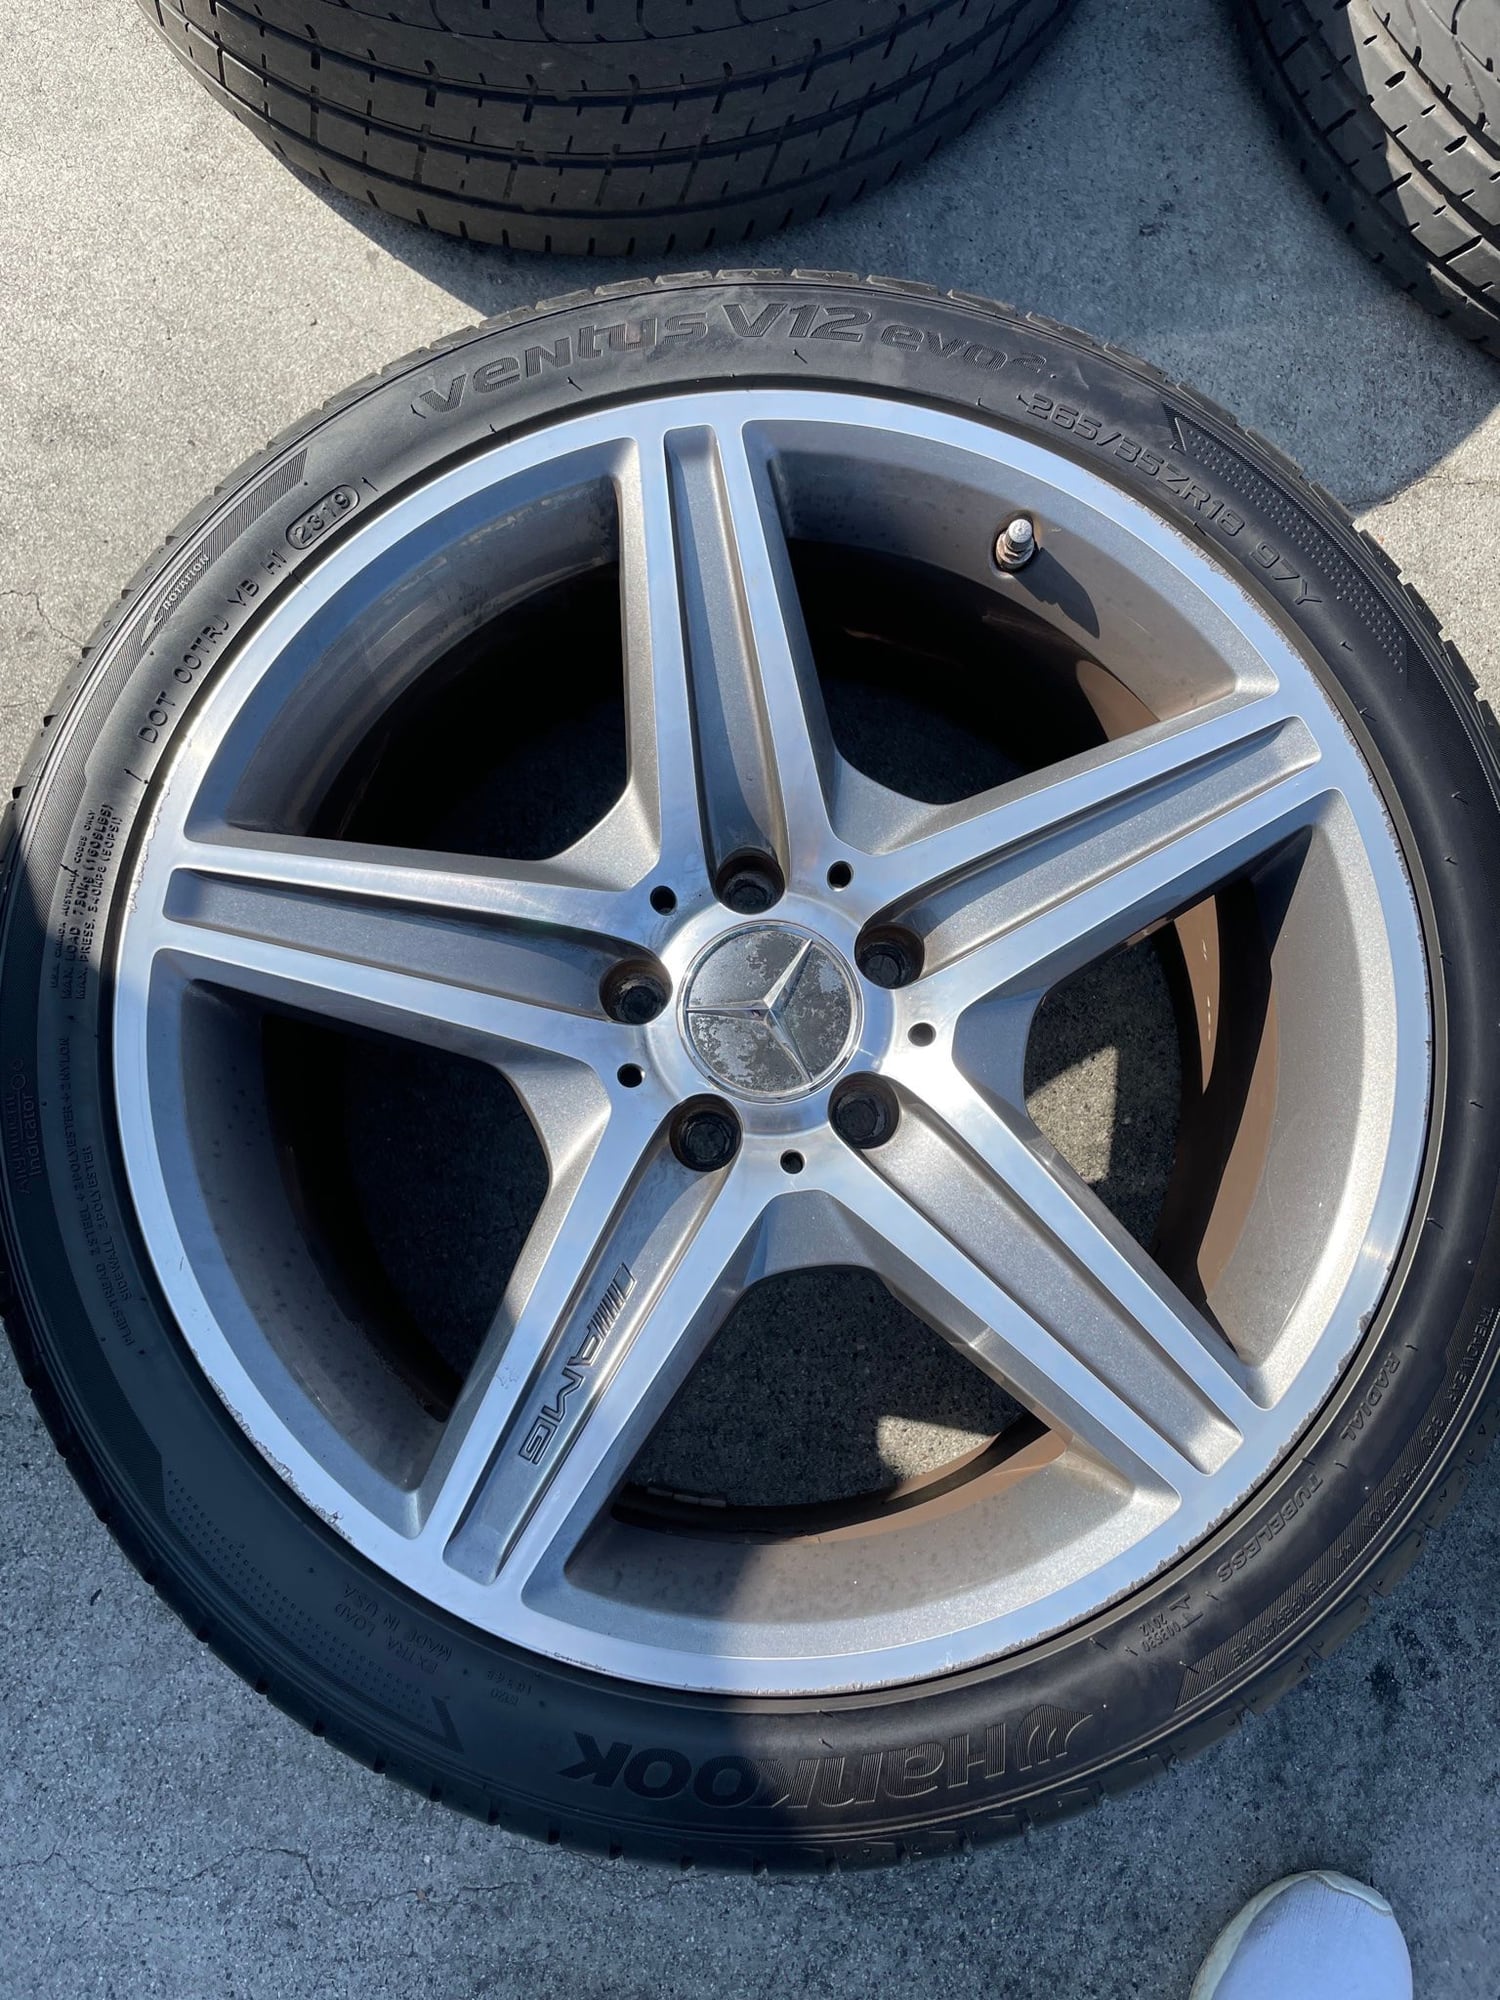 Wheels and Tires/Axles - W211 E63 AMG 18 inch one-piece stock wheels - Used - 2003 to 2009 Mercedes-Benz E-Class - San Jose, CA 95131, United States